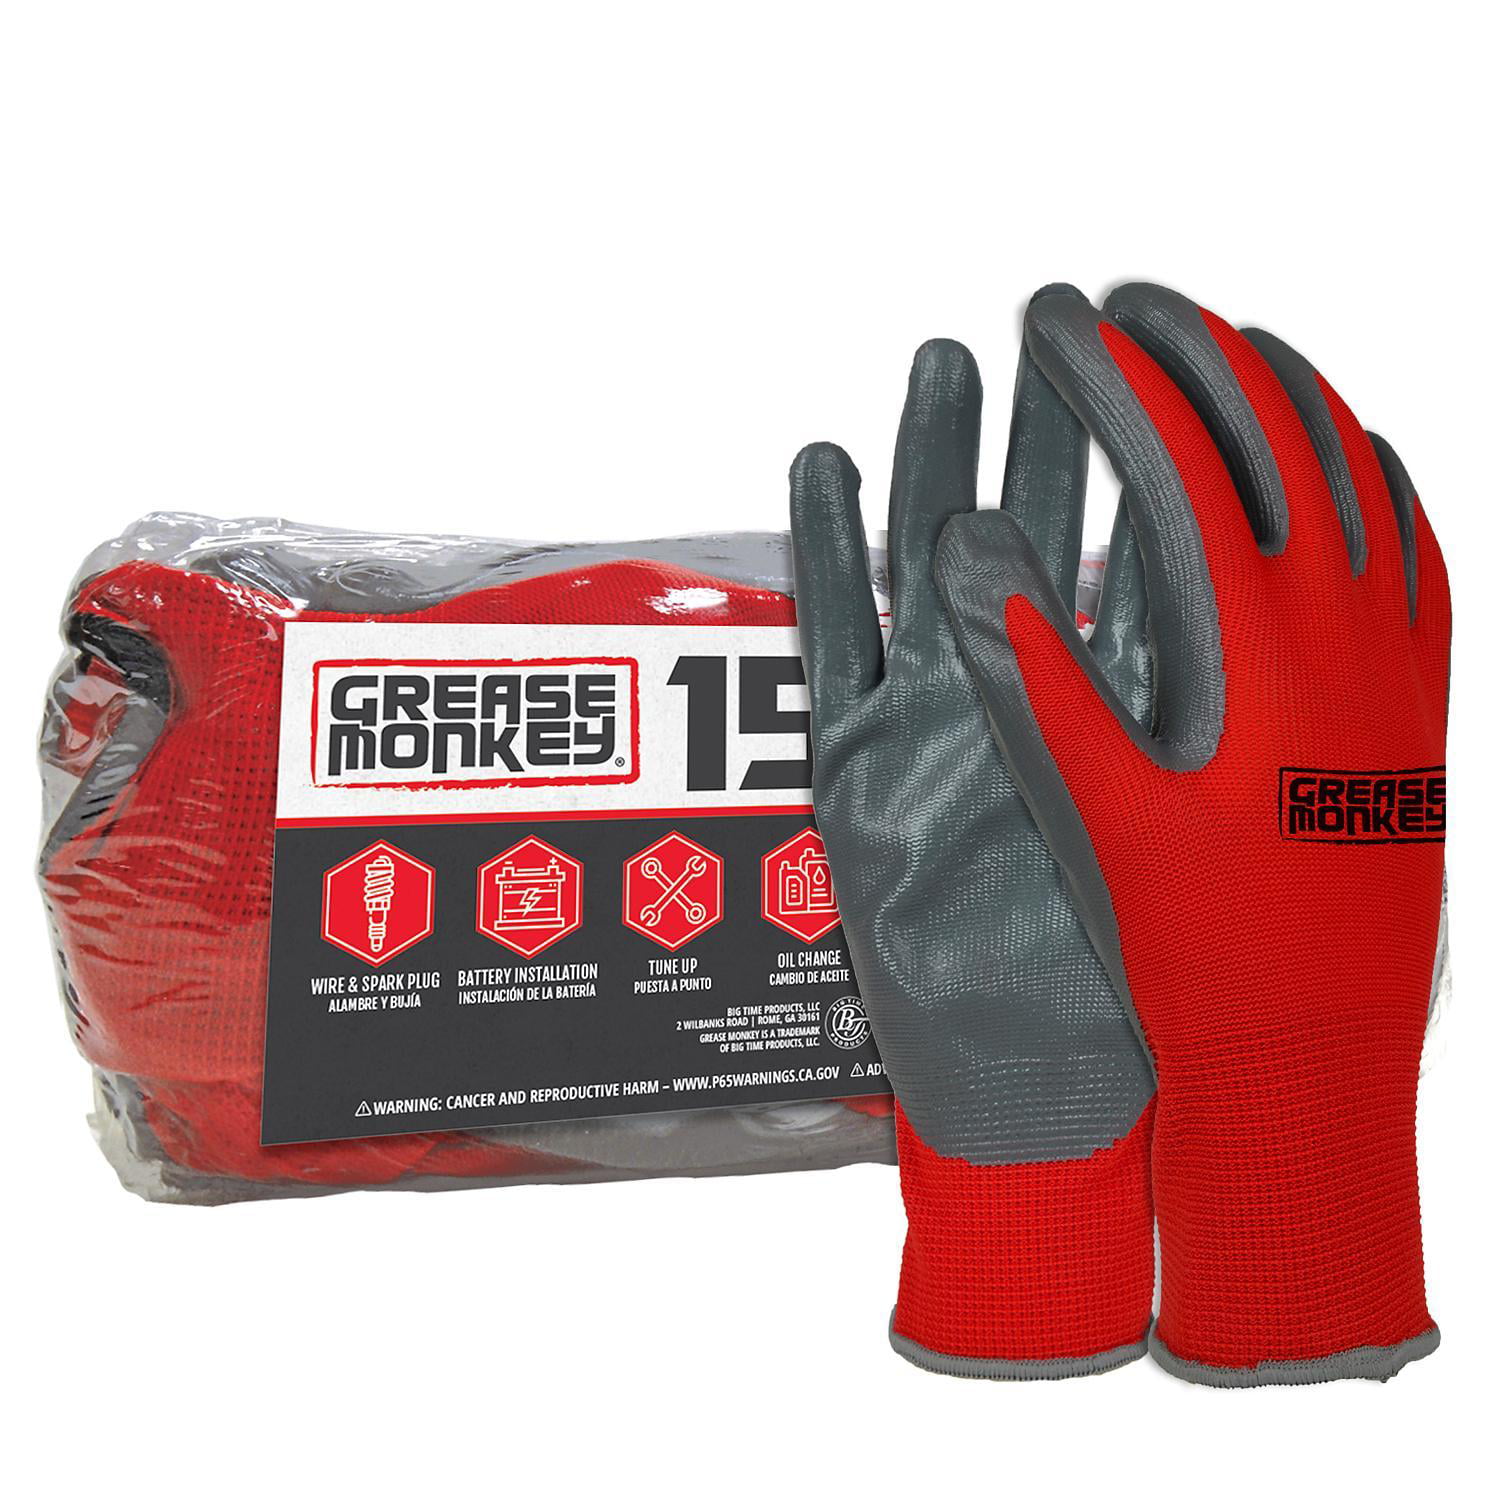 2 Pair Value Pack Medium Big Time Products Grease Monkey Utility Work Gloves 